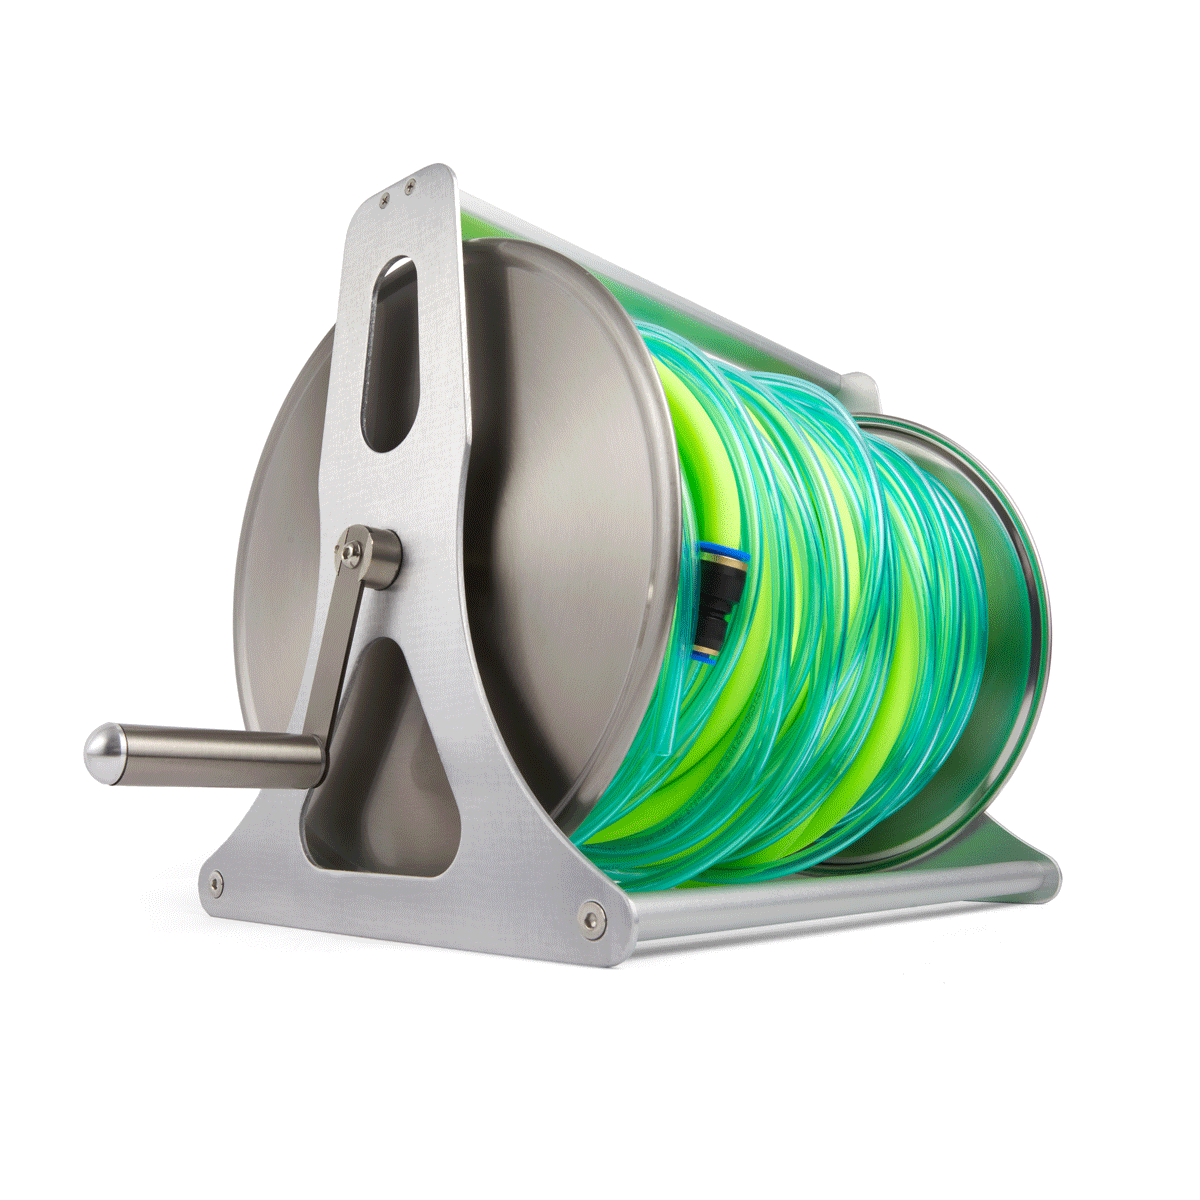  Best Choice Products 300ft Water Hose Reel Cart w